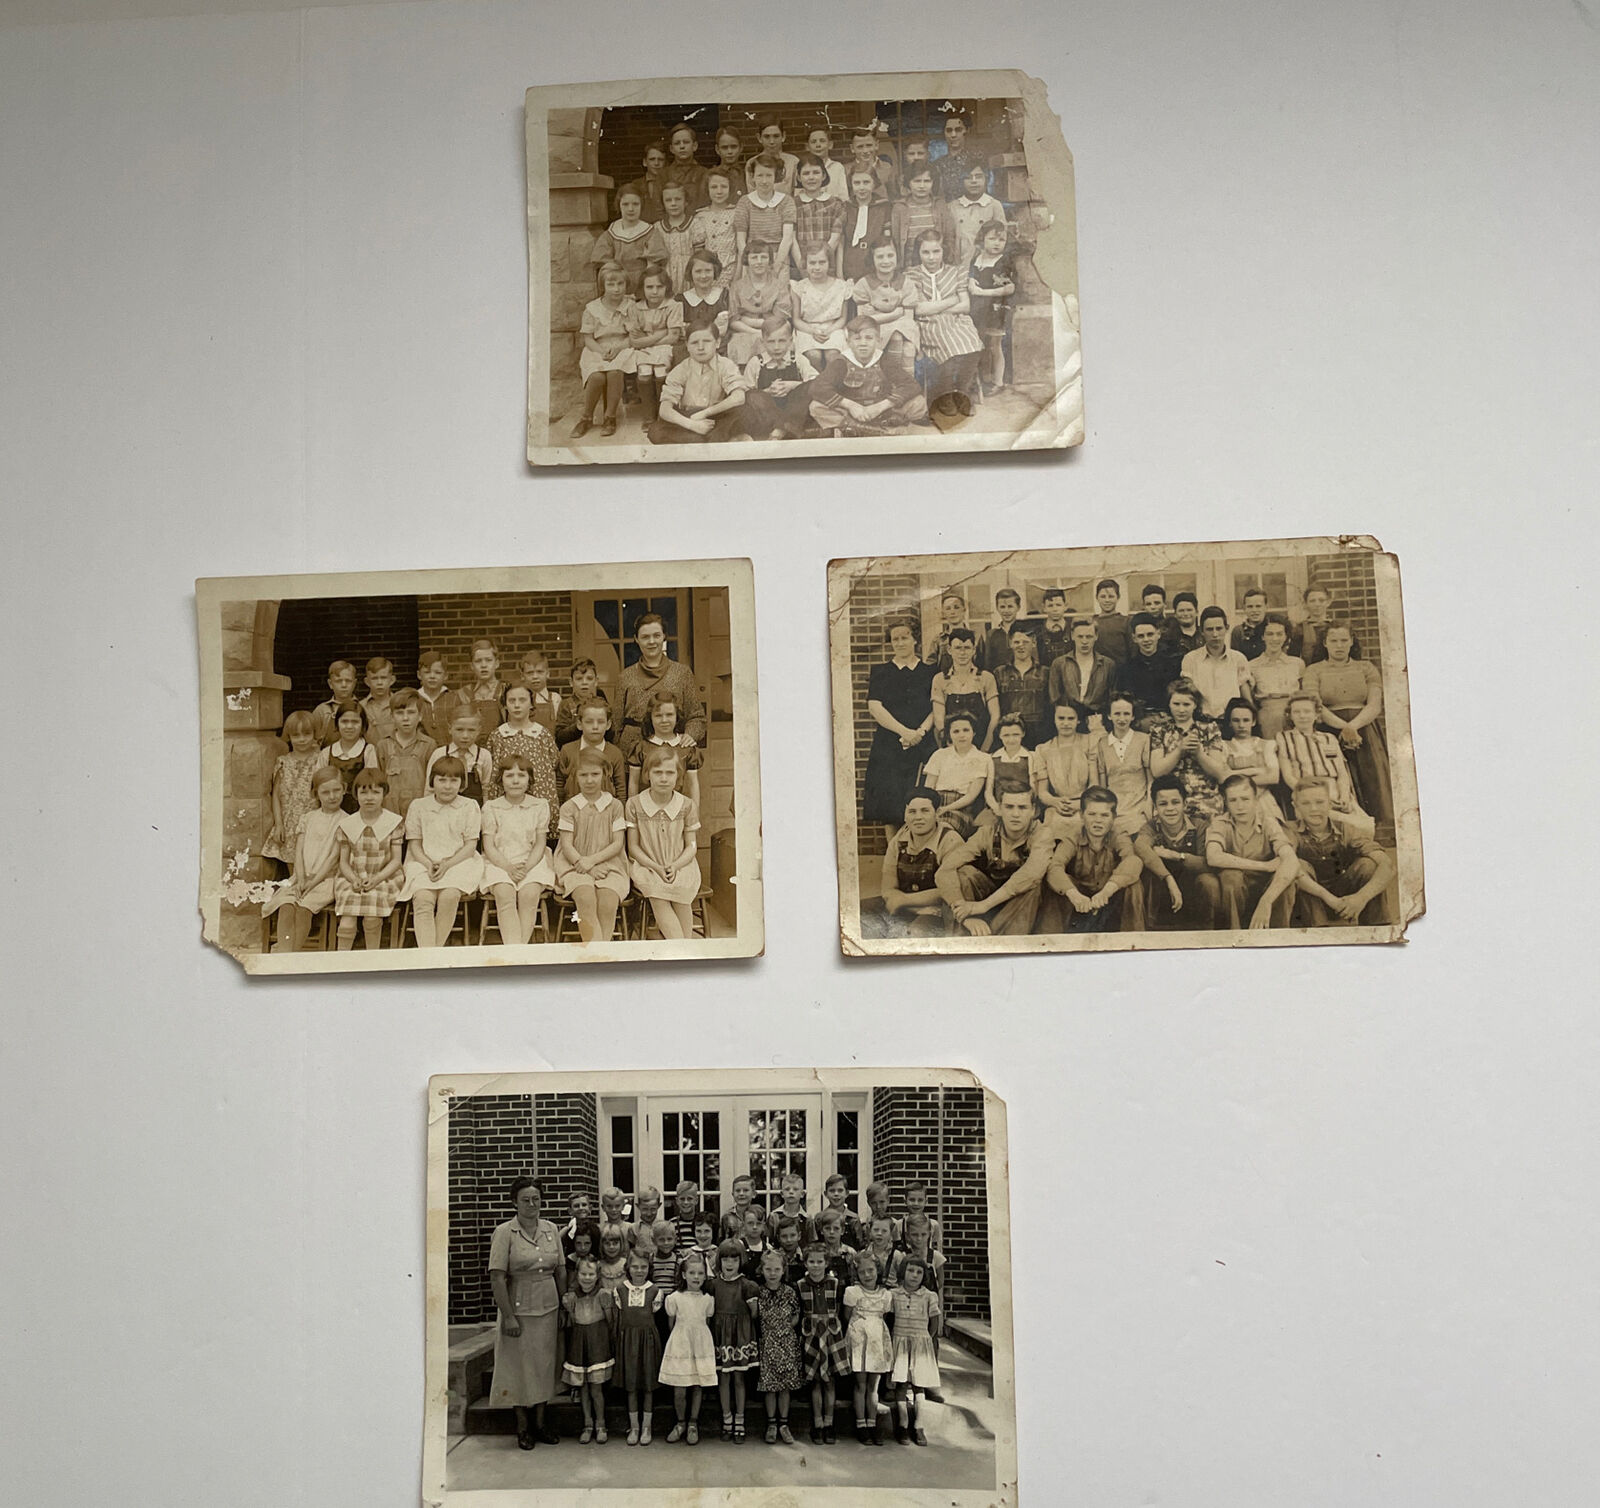 Photograph 1930-1940s’s Boys Girls School Class Students Lot Of 4 Vintage